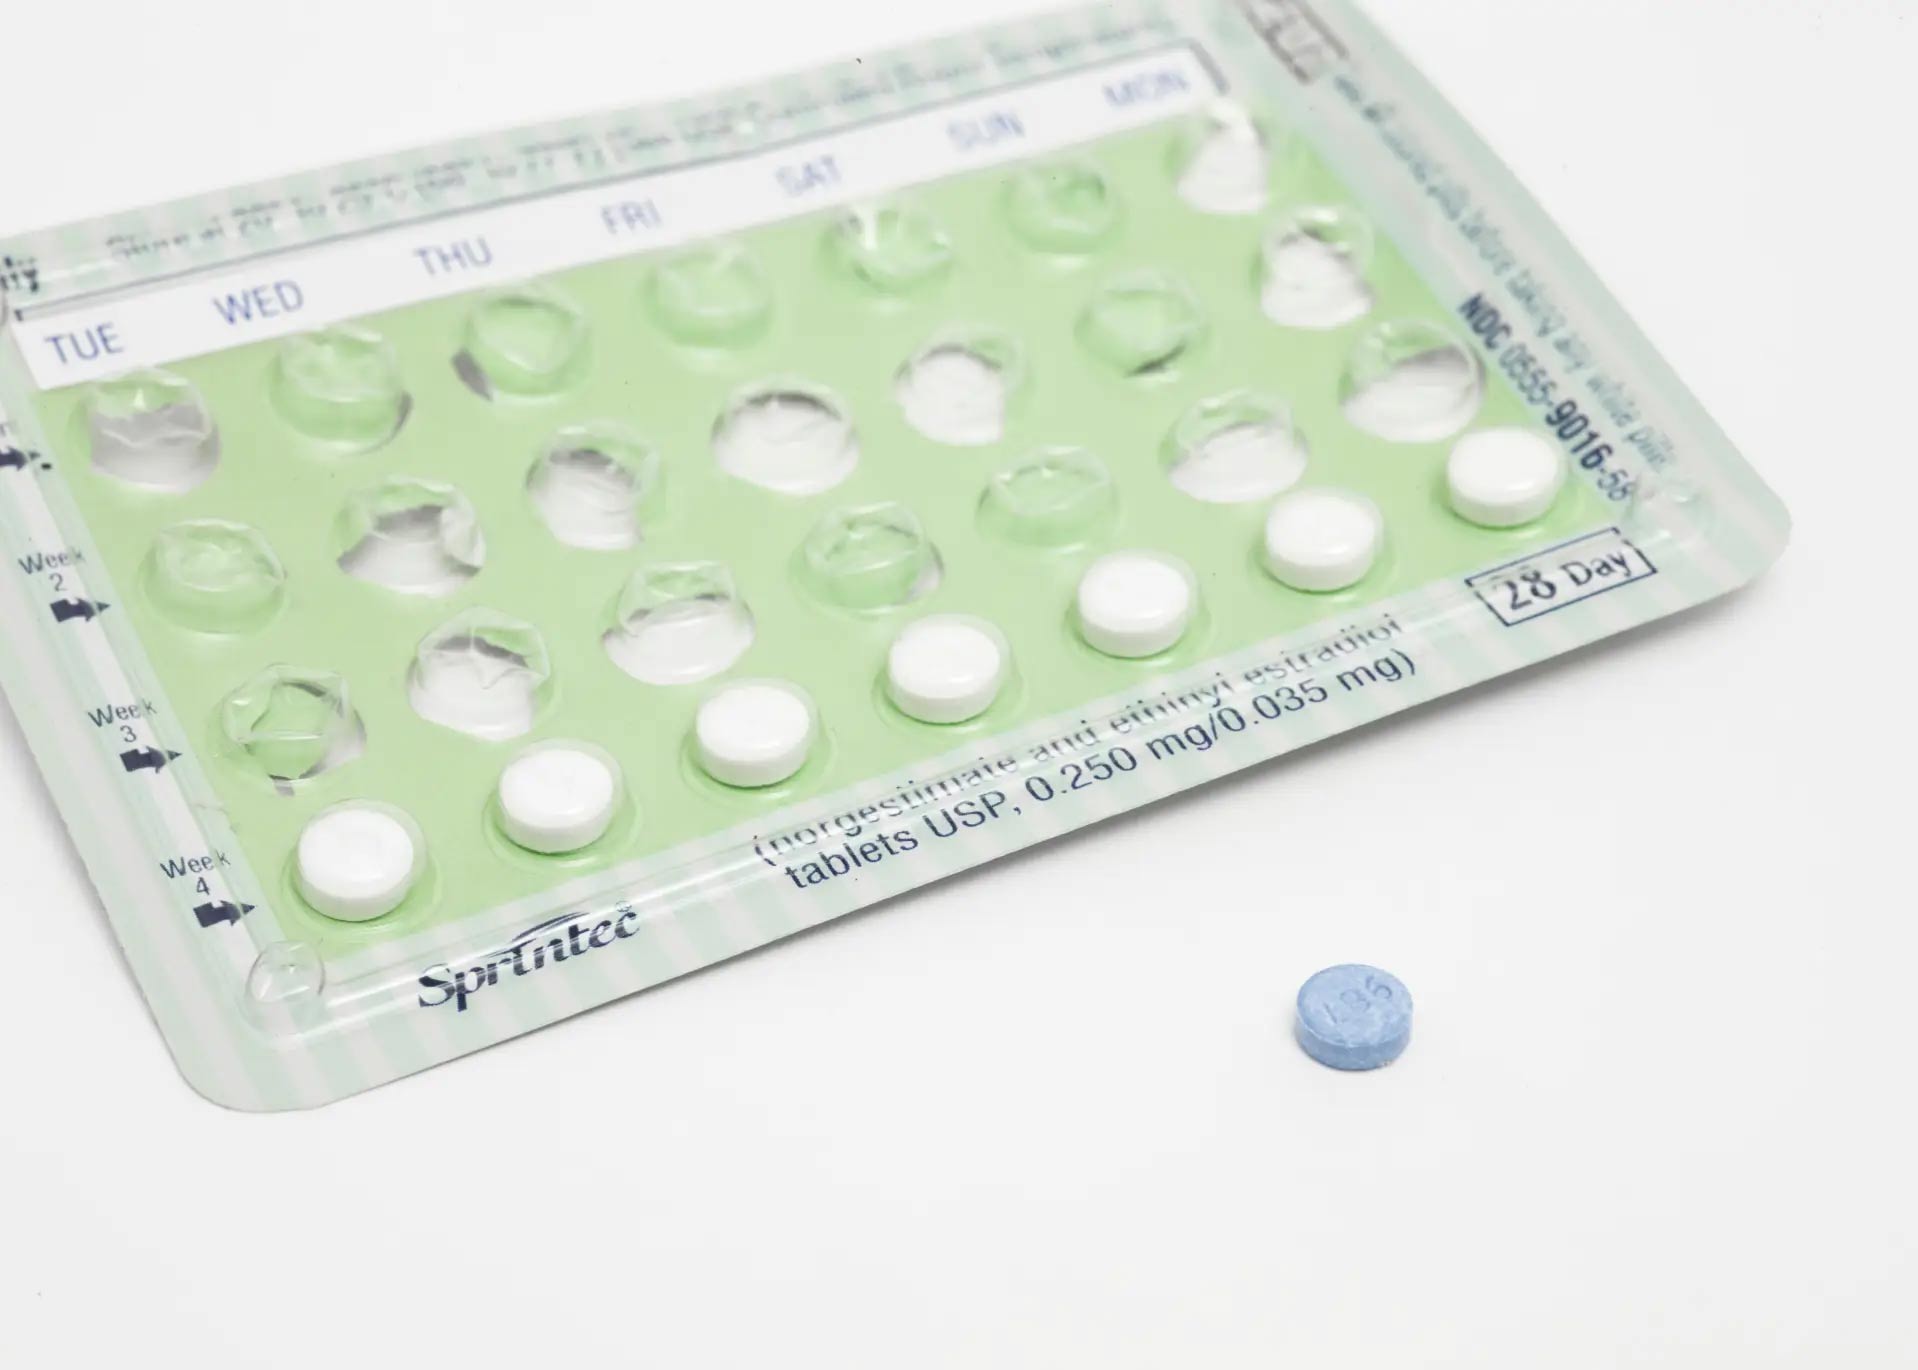 A partially empty birth control packet